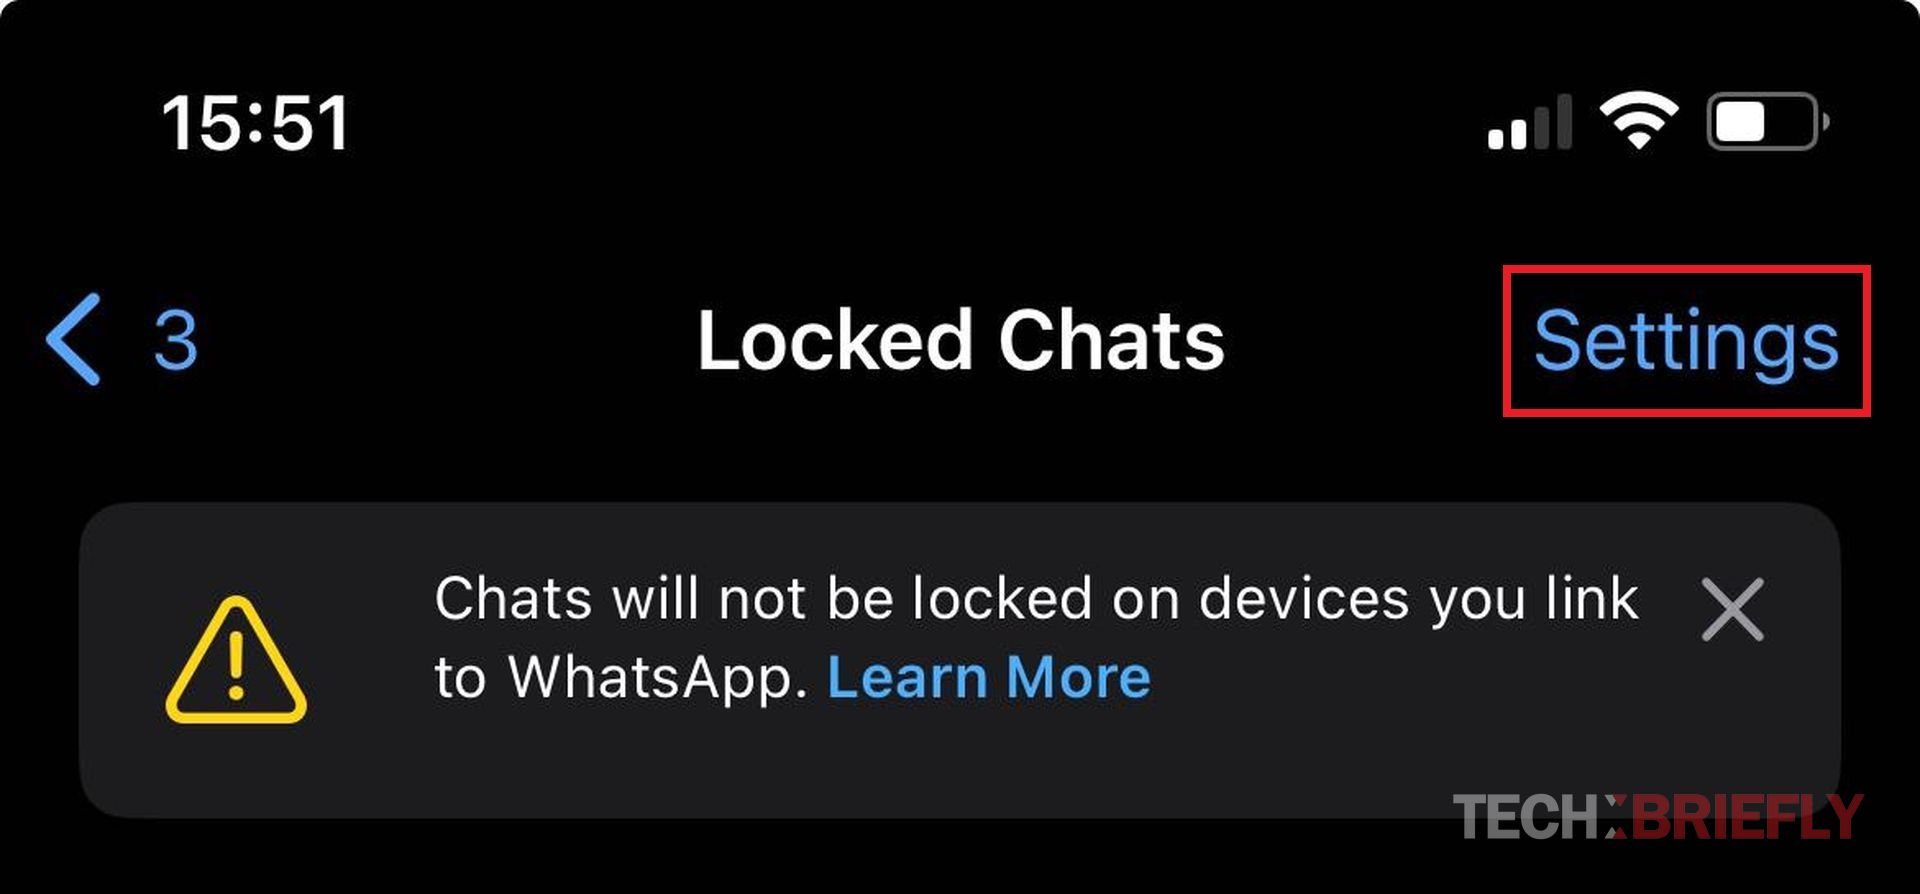 WhatsApp chat lock feature coming to linked devices